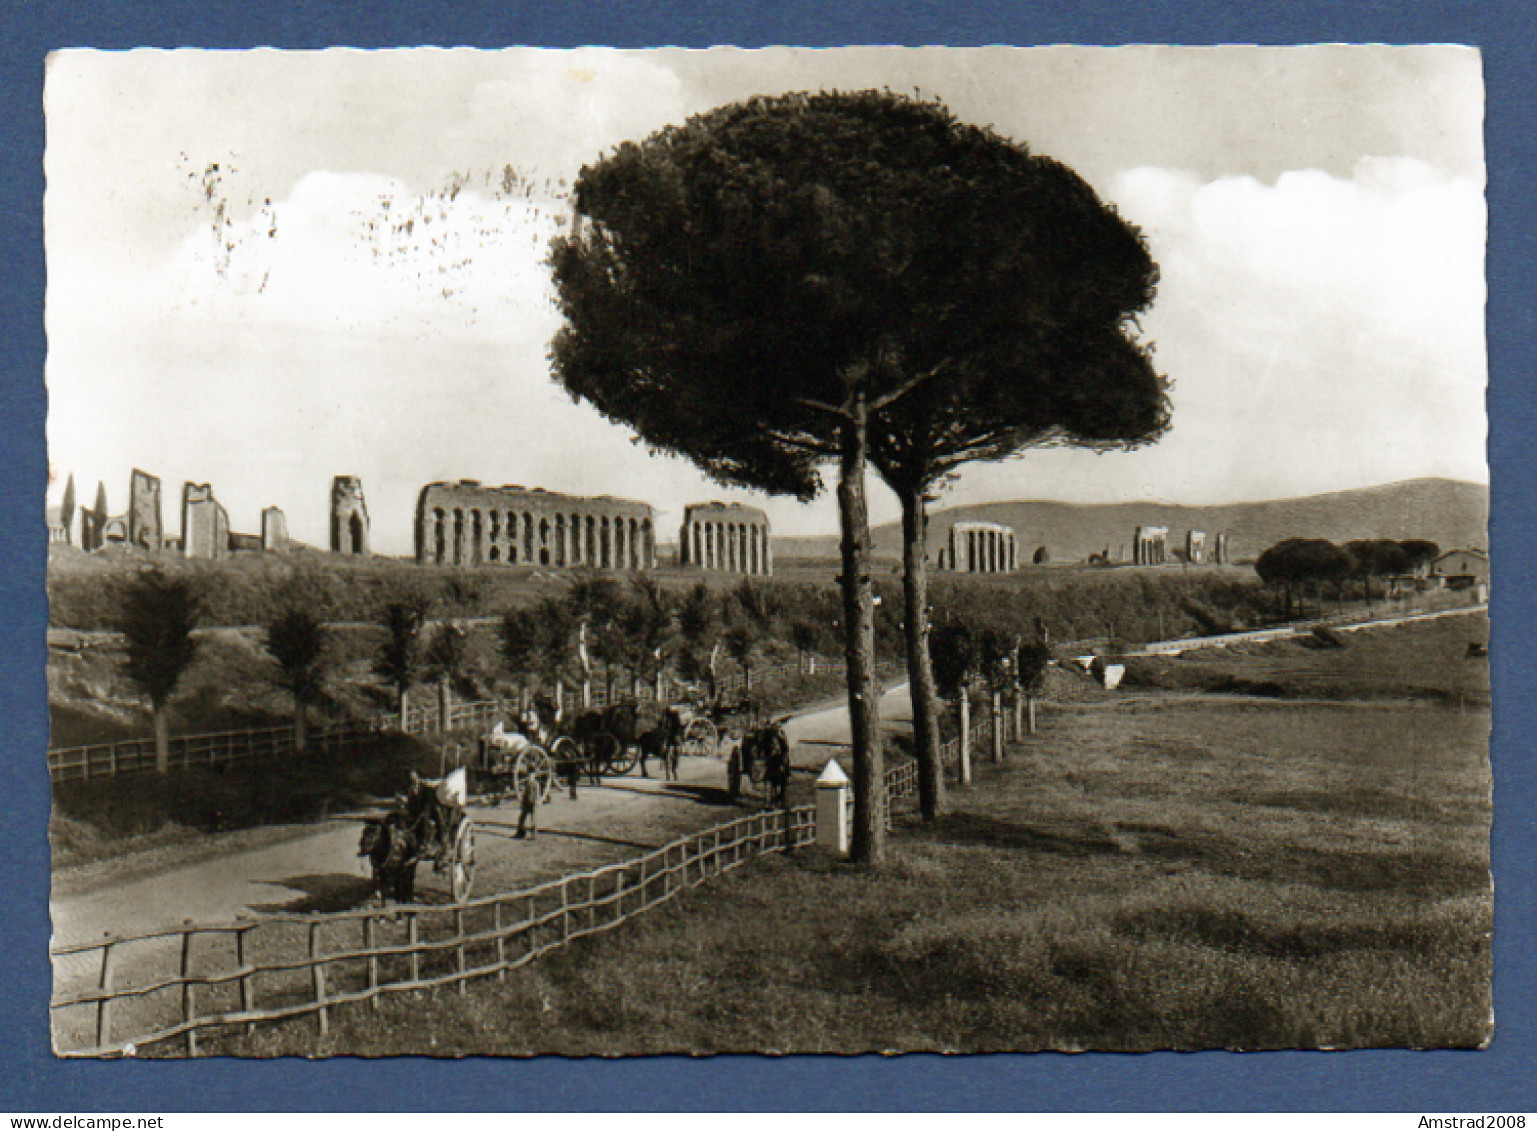 1958 - ROMA - VIA APPIA  ANTICA  -  ITALIE - Stades & Structures Sportives